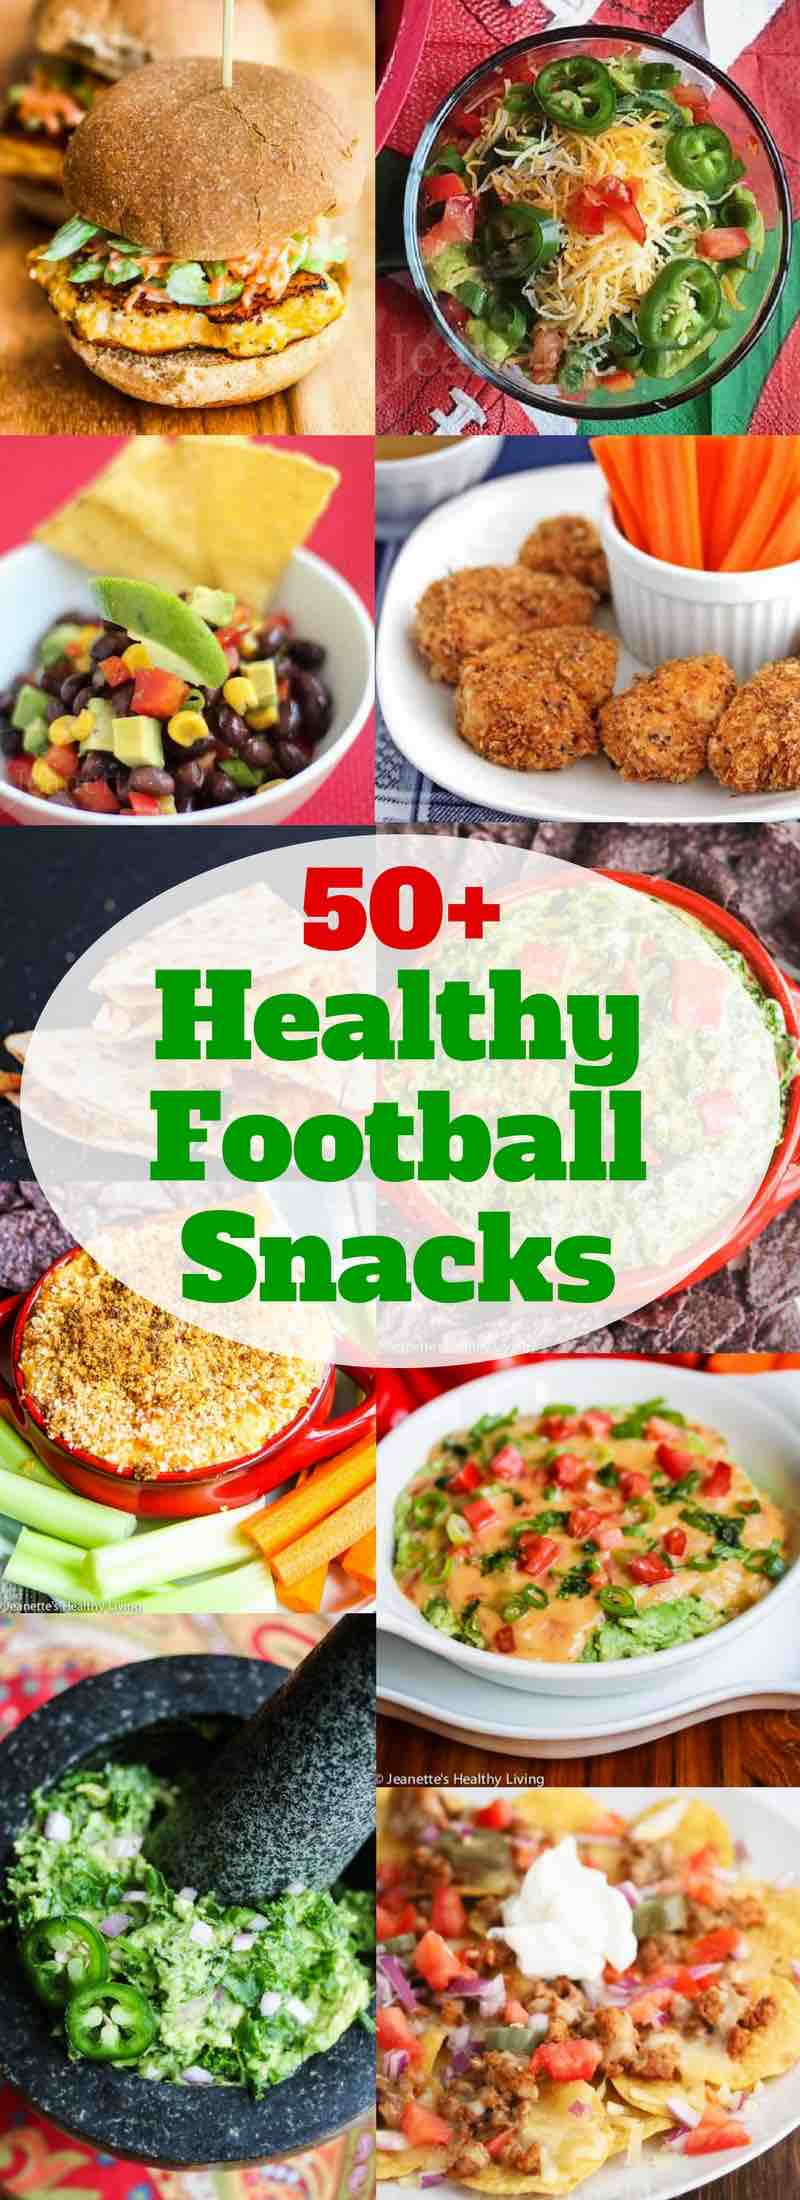 50+ Healthy Football Snacks - lightened up versions of favorite game day eats